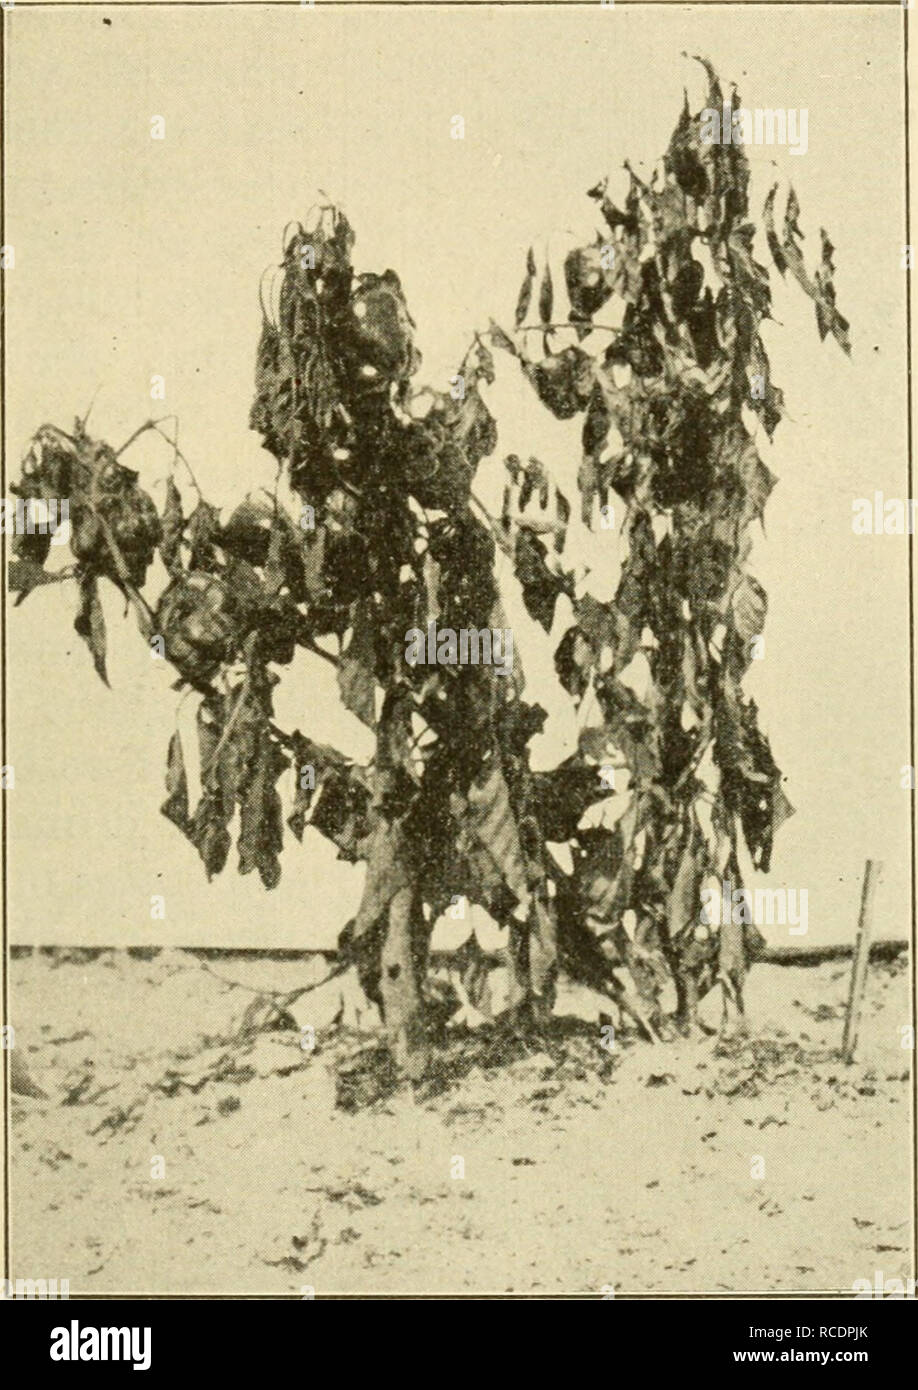 . Diseases of economic plants. Plant diseases. Vegetable and Field Crops 215 PEPPER Southern-blight, wilt ^^ {Sclerotium rolfsii Sacc). — Blight shows itself first by a slight drooping of the leaf tips by day,. Fig. 117. — Pepper plant showing effects of the Southern-blight. After Fulton. followed by night recovery. The wilt becomes more pro- nounced on succeeding days until in the third or fourth day the leaves wilt permanently, lose color, dry, and soon fall. These stages may succeed each other so rapidly as to ap- pear almost simultaneous. The roots appear normal; but on the stem near the g Stock Photo